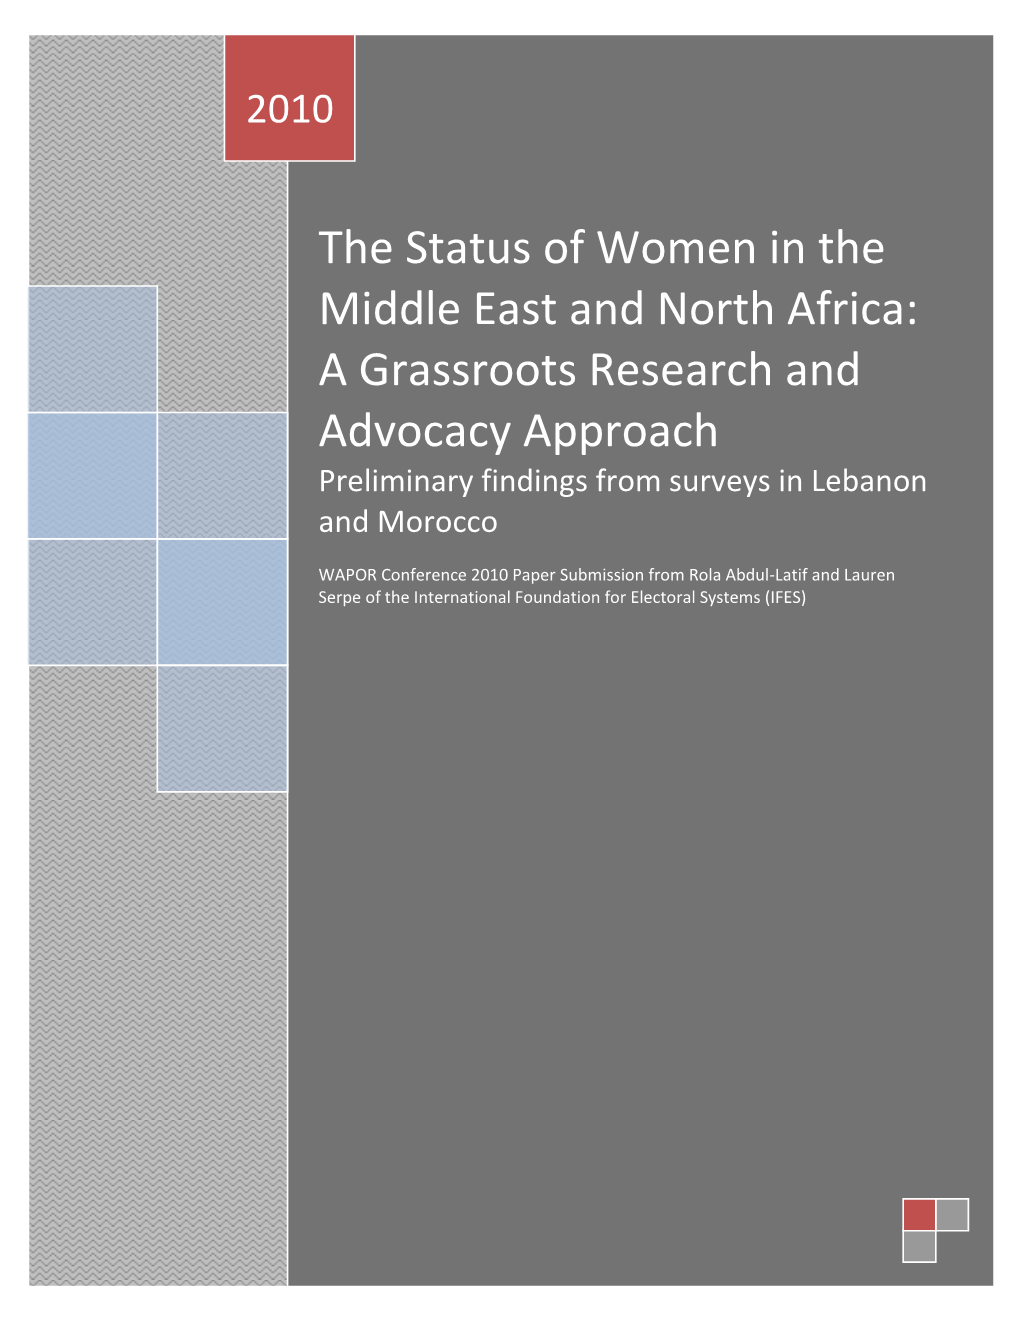 The Status of Women in the Middle East and North Africa: a Grassroots Research and Advocacy Approach Preliminary Findings from Surveys in Lebanon and Morocco